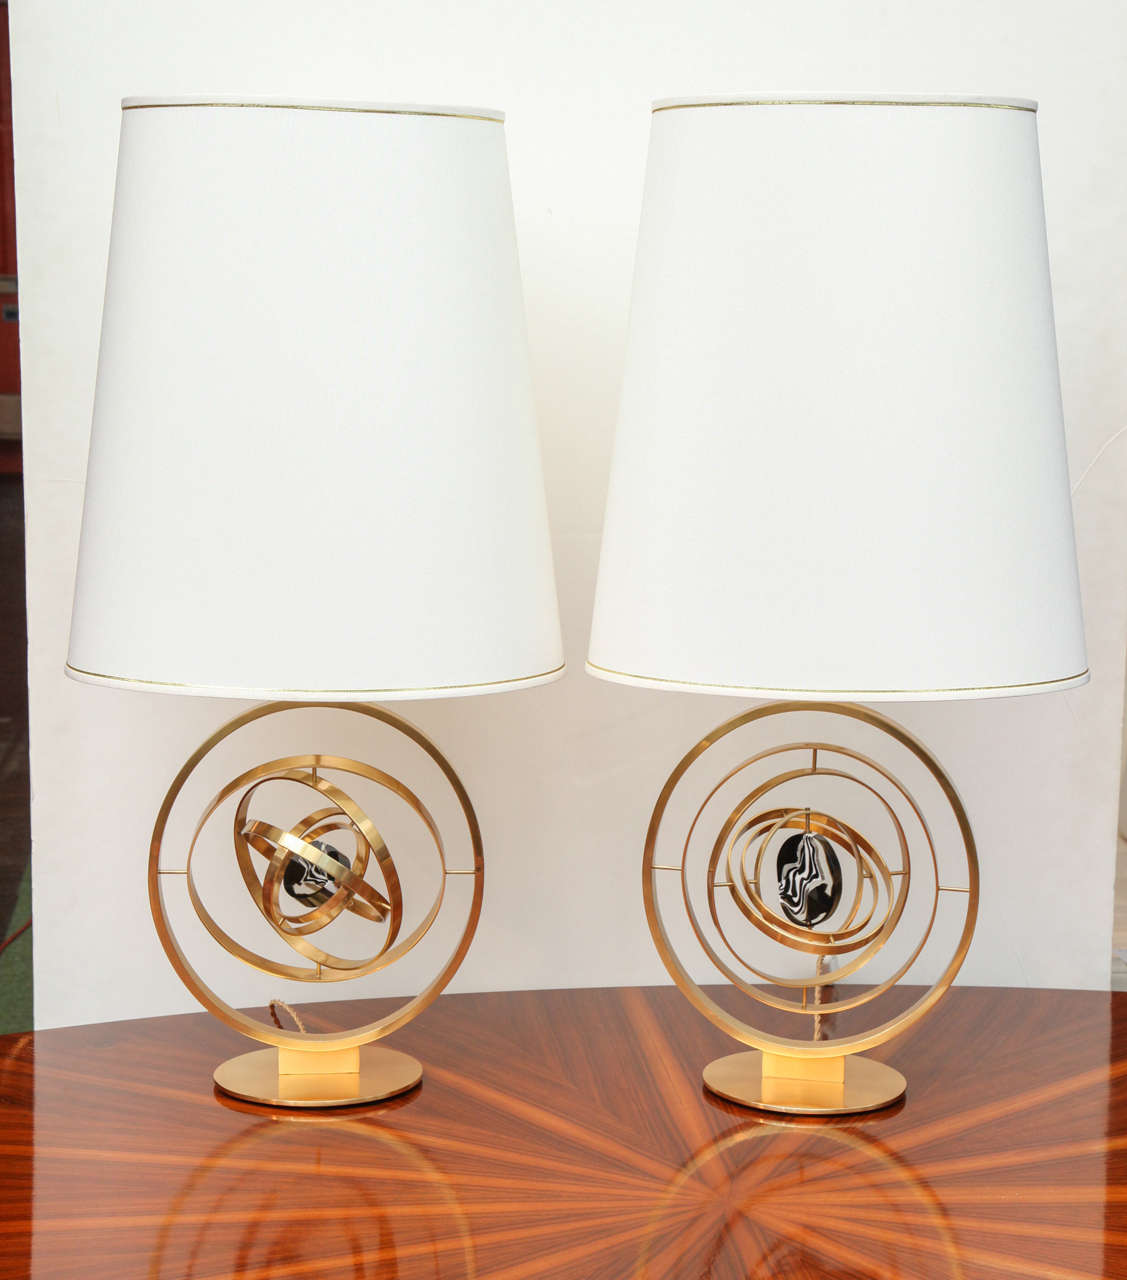 Studio built pair of "Giroscopio" lamps by Roberto Giulio Rida. Pivoting polished brass element's that recreate the movements of a gyroscope. Cast molten-glass centerpieces. Oval shaped fabric shades. These lamps are created around the